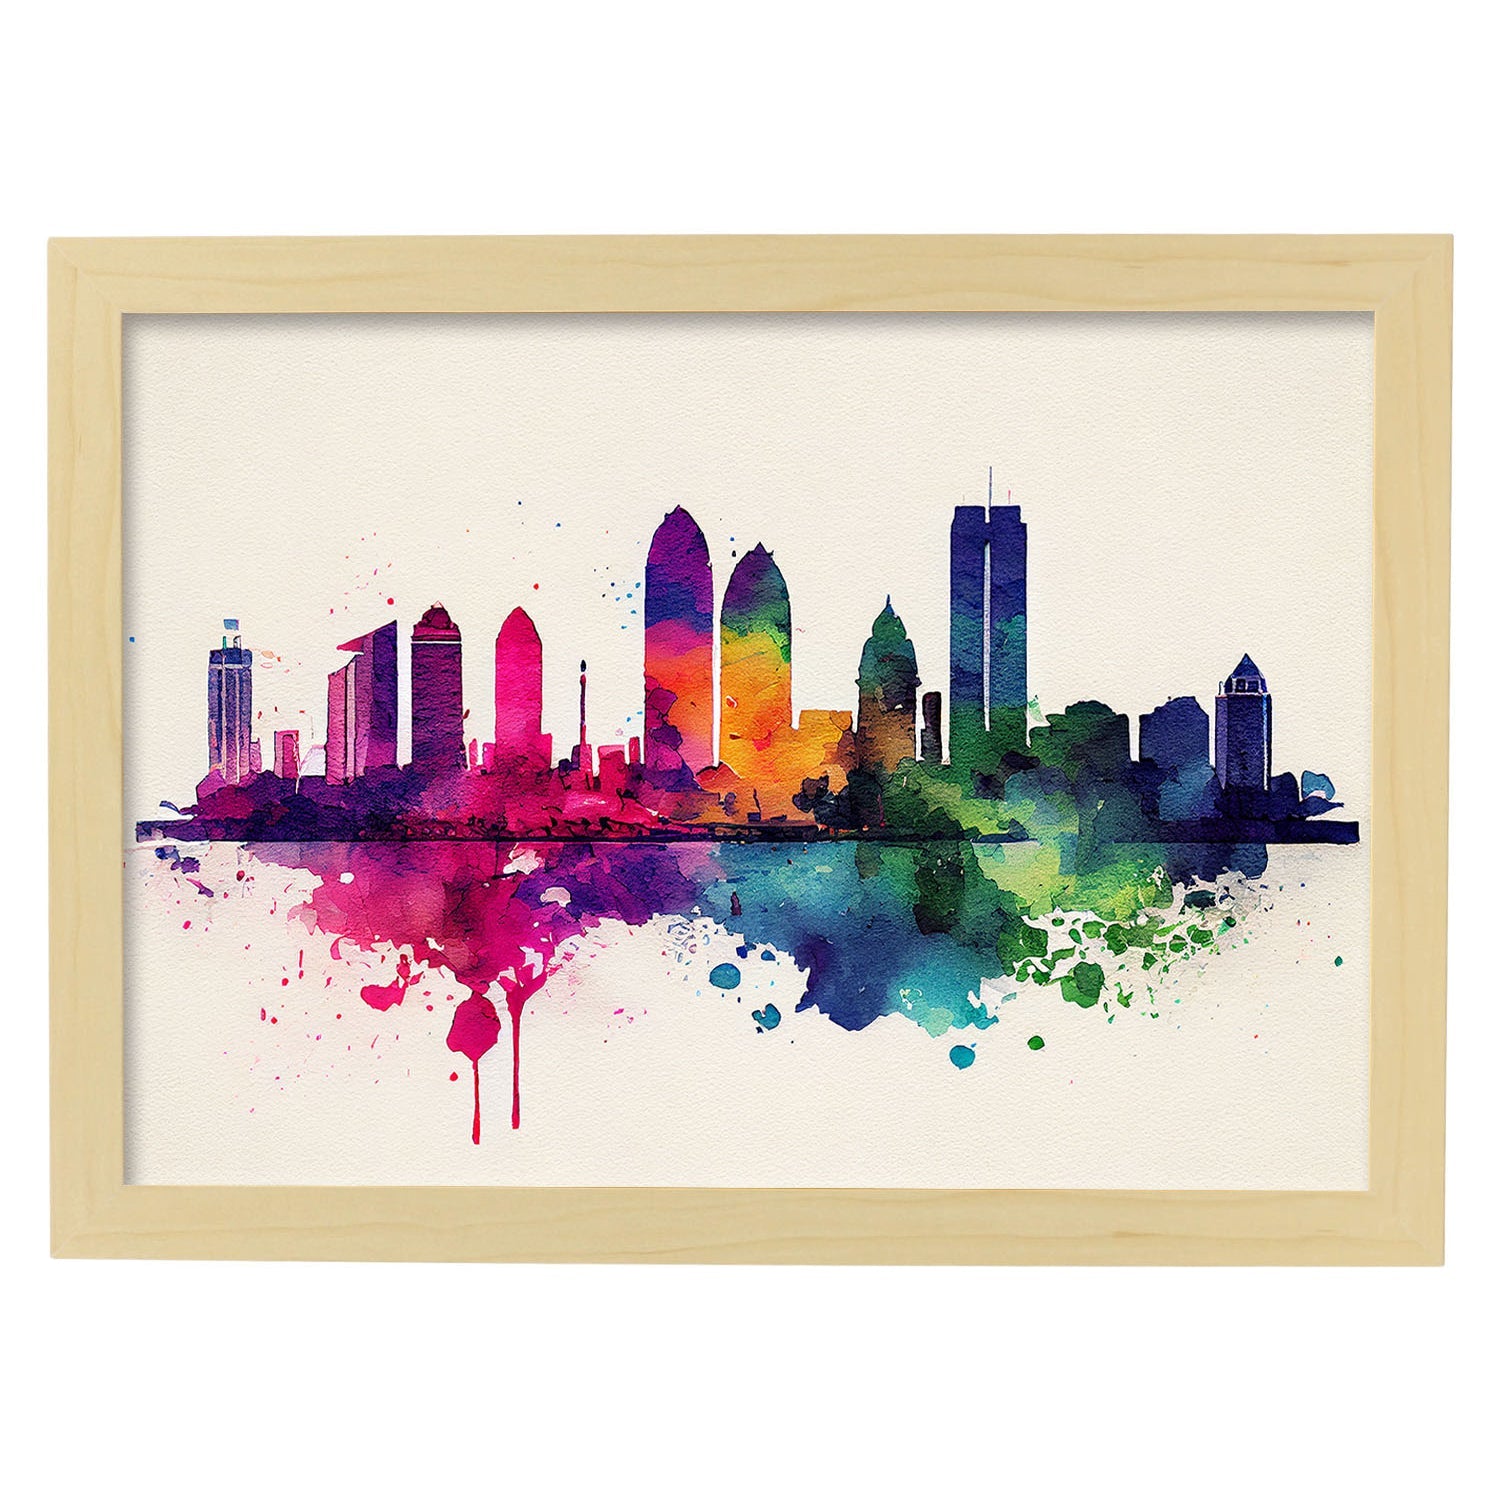 Nacnic watercolor of a skyline of the city of Cancun_1. Aesthetic Wall Art Prints for Bedroom or Living Room Design.-Artwork-Nacnic-A4-Marco Madera Clara-Nacnic Estudio SL